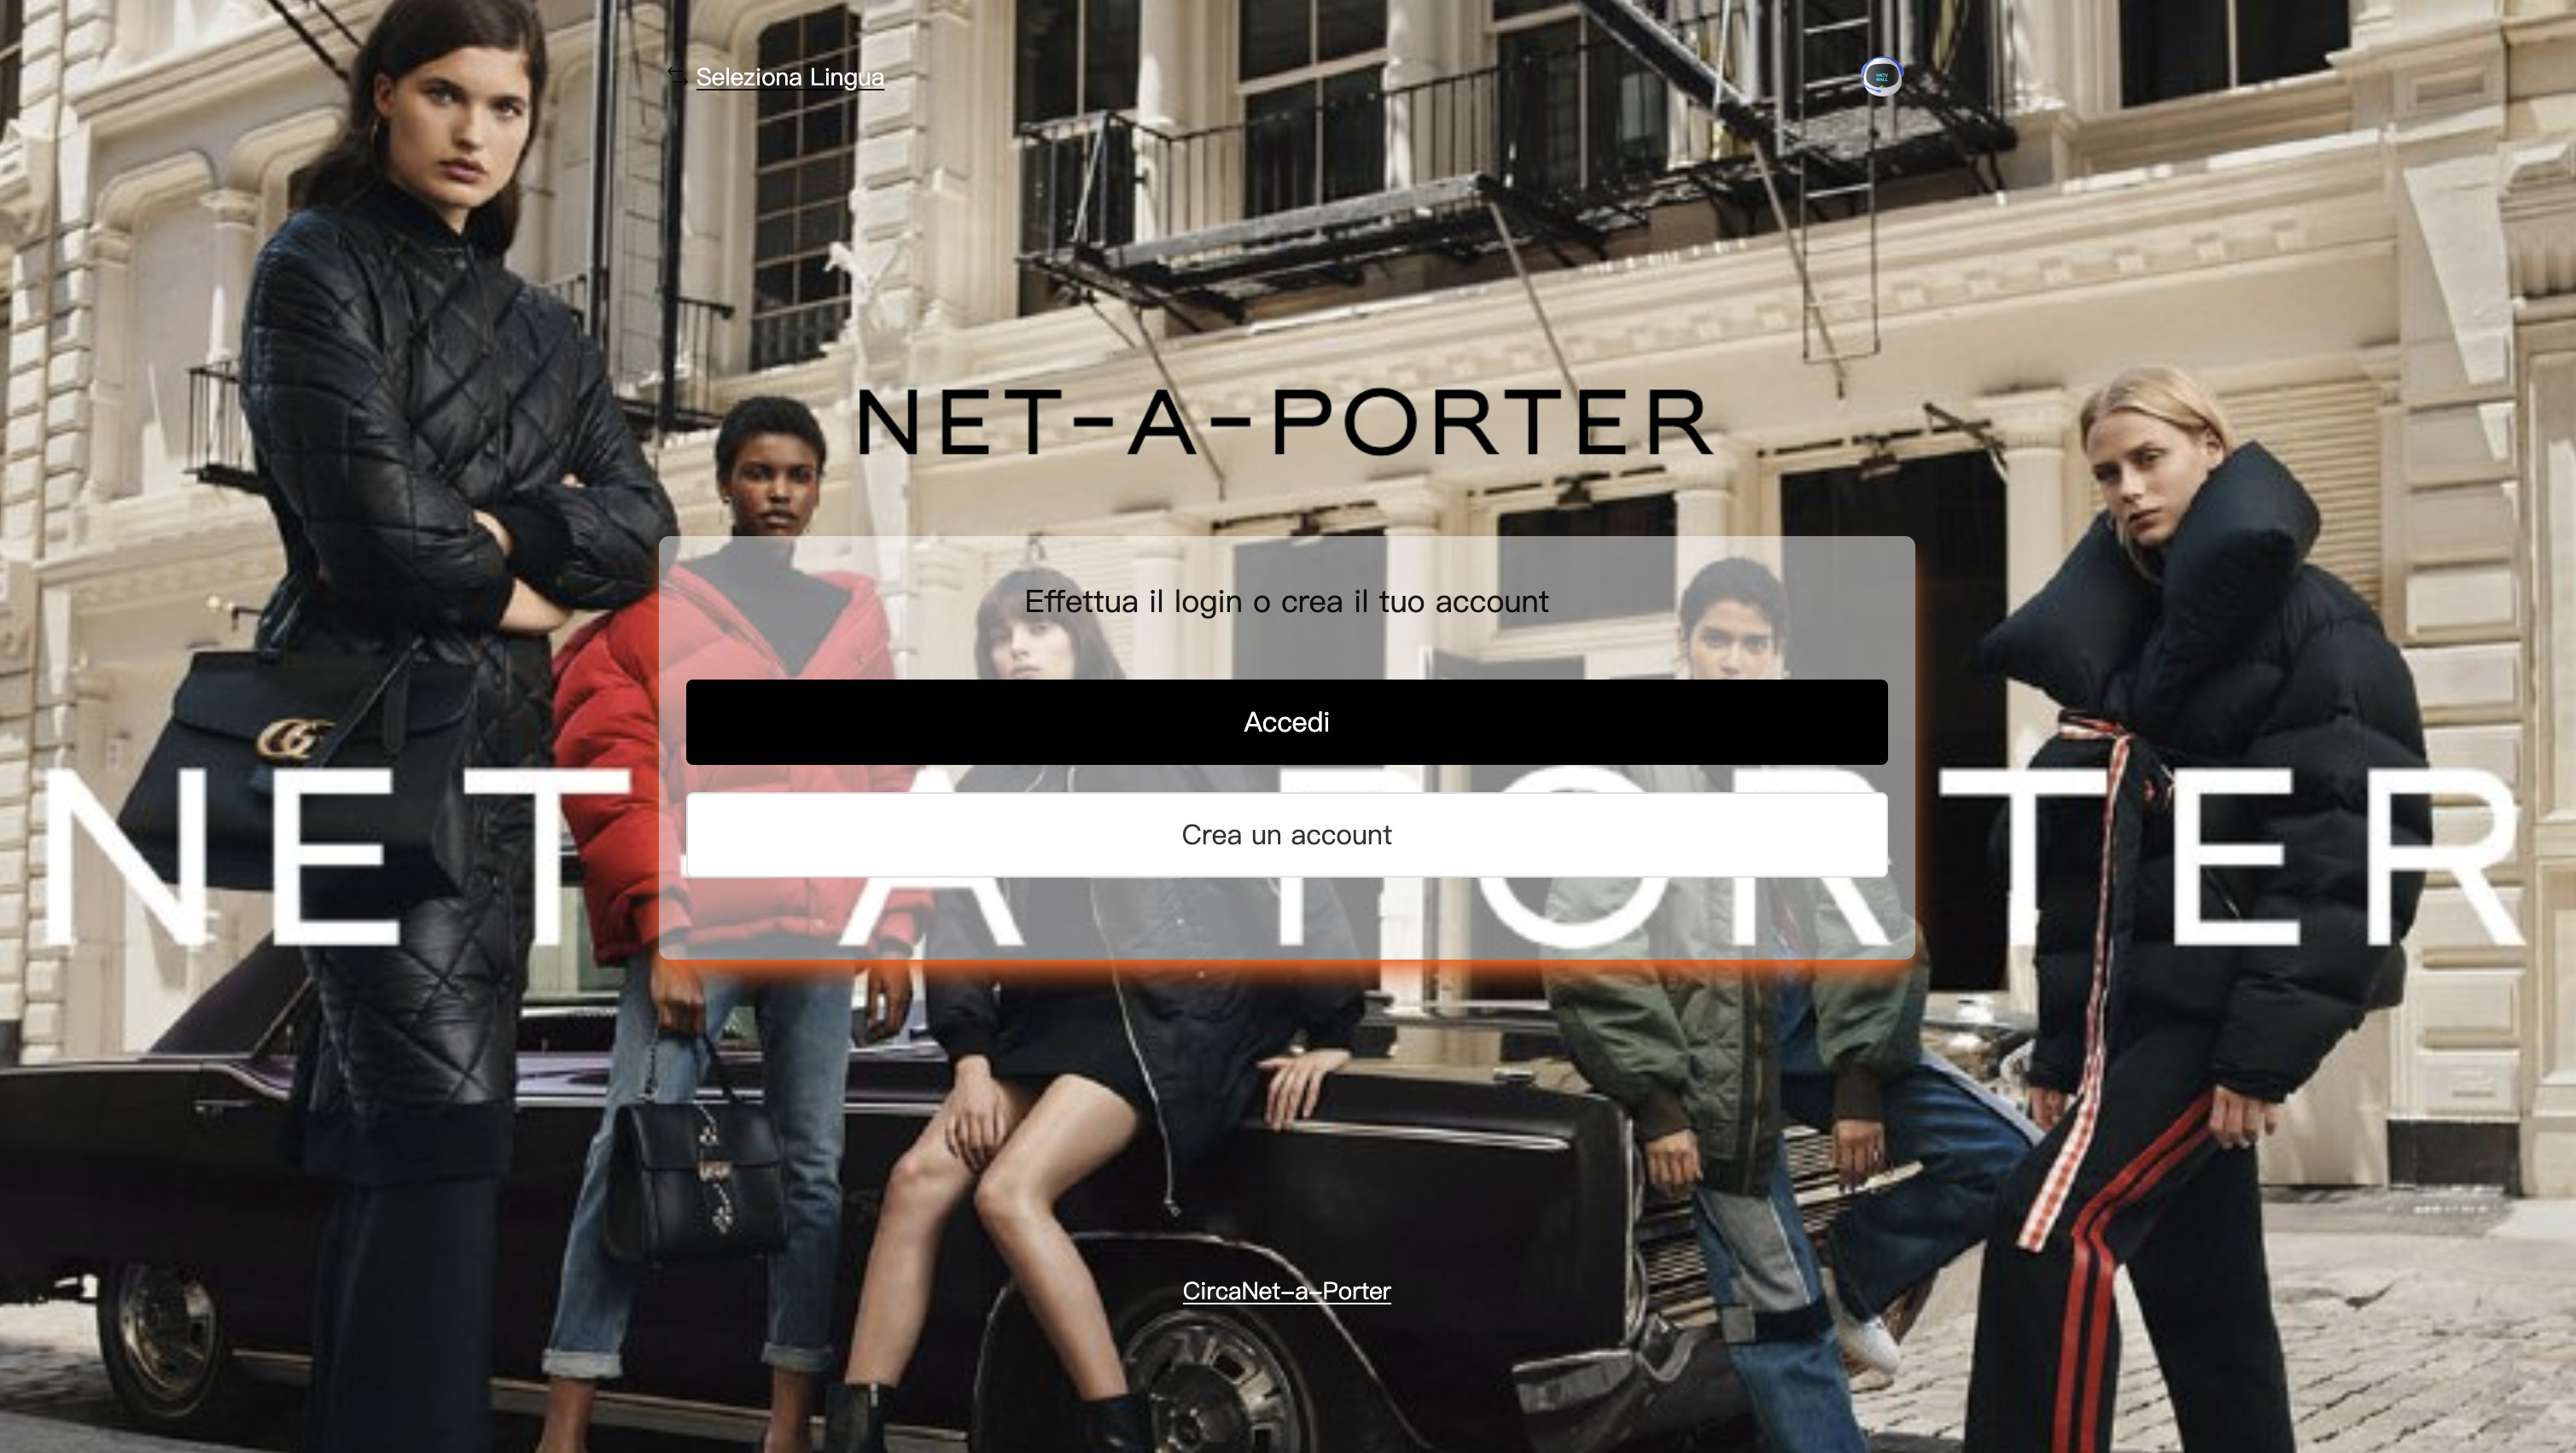 Netaporter: reviews. Scam or not. Online fraud lawyer